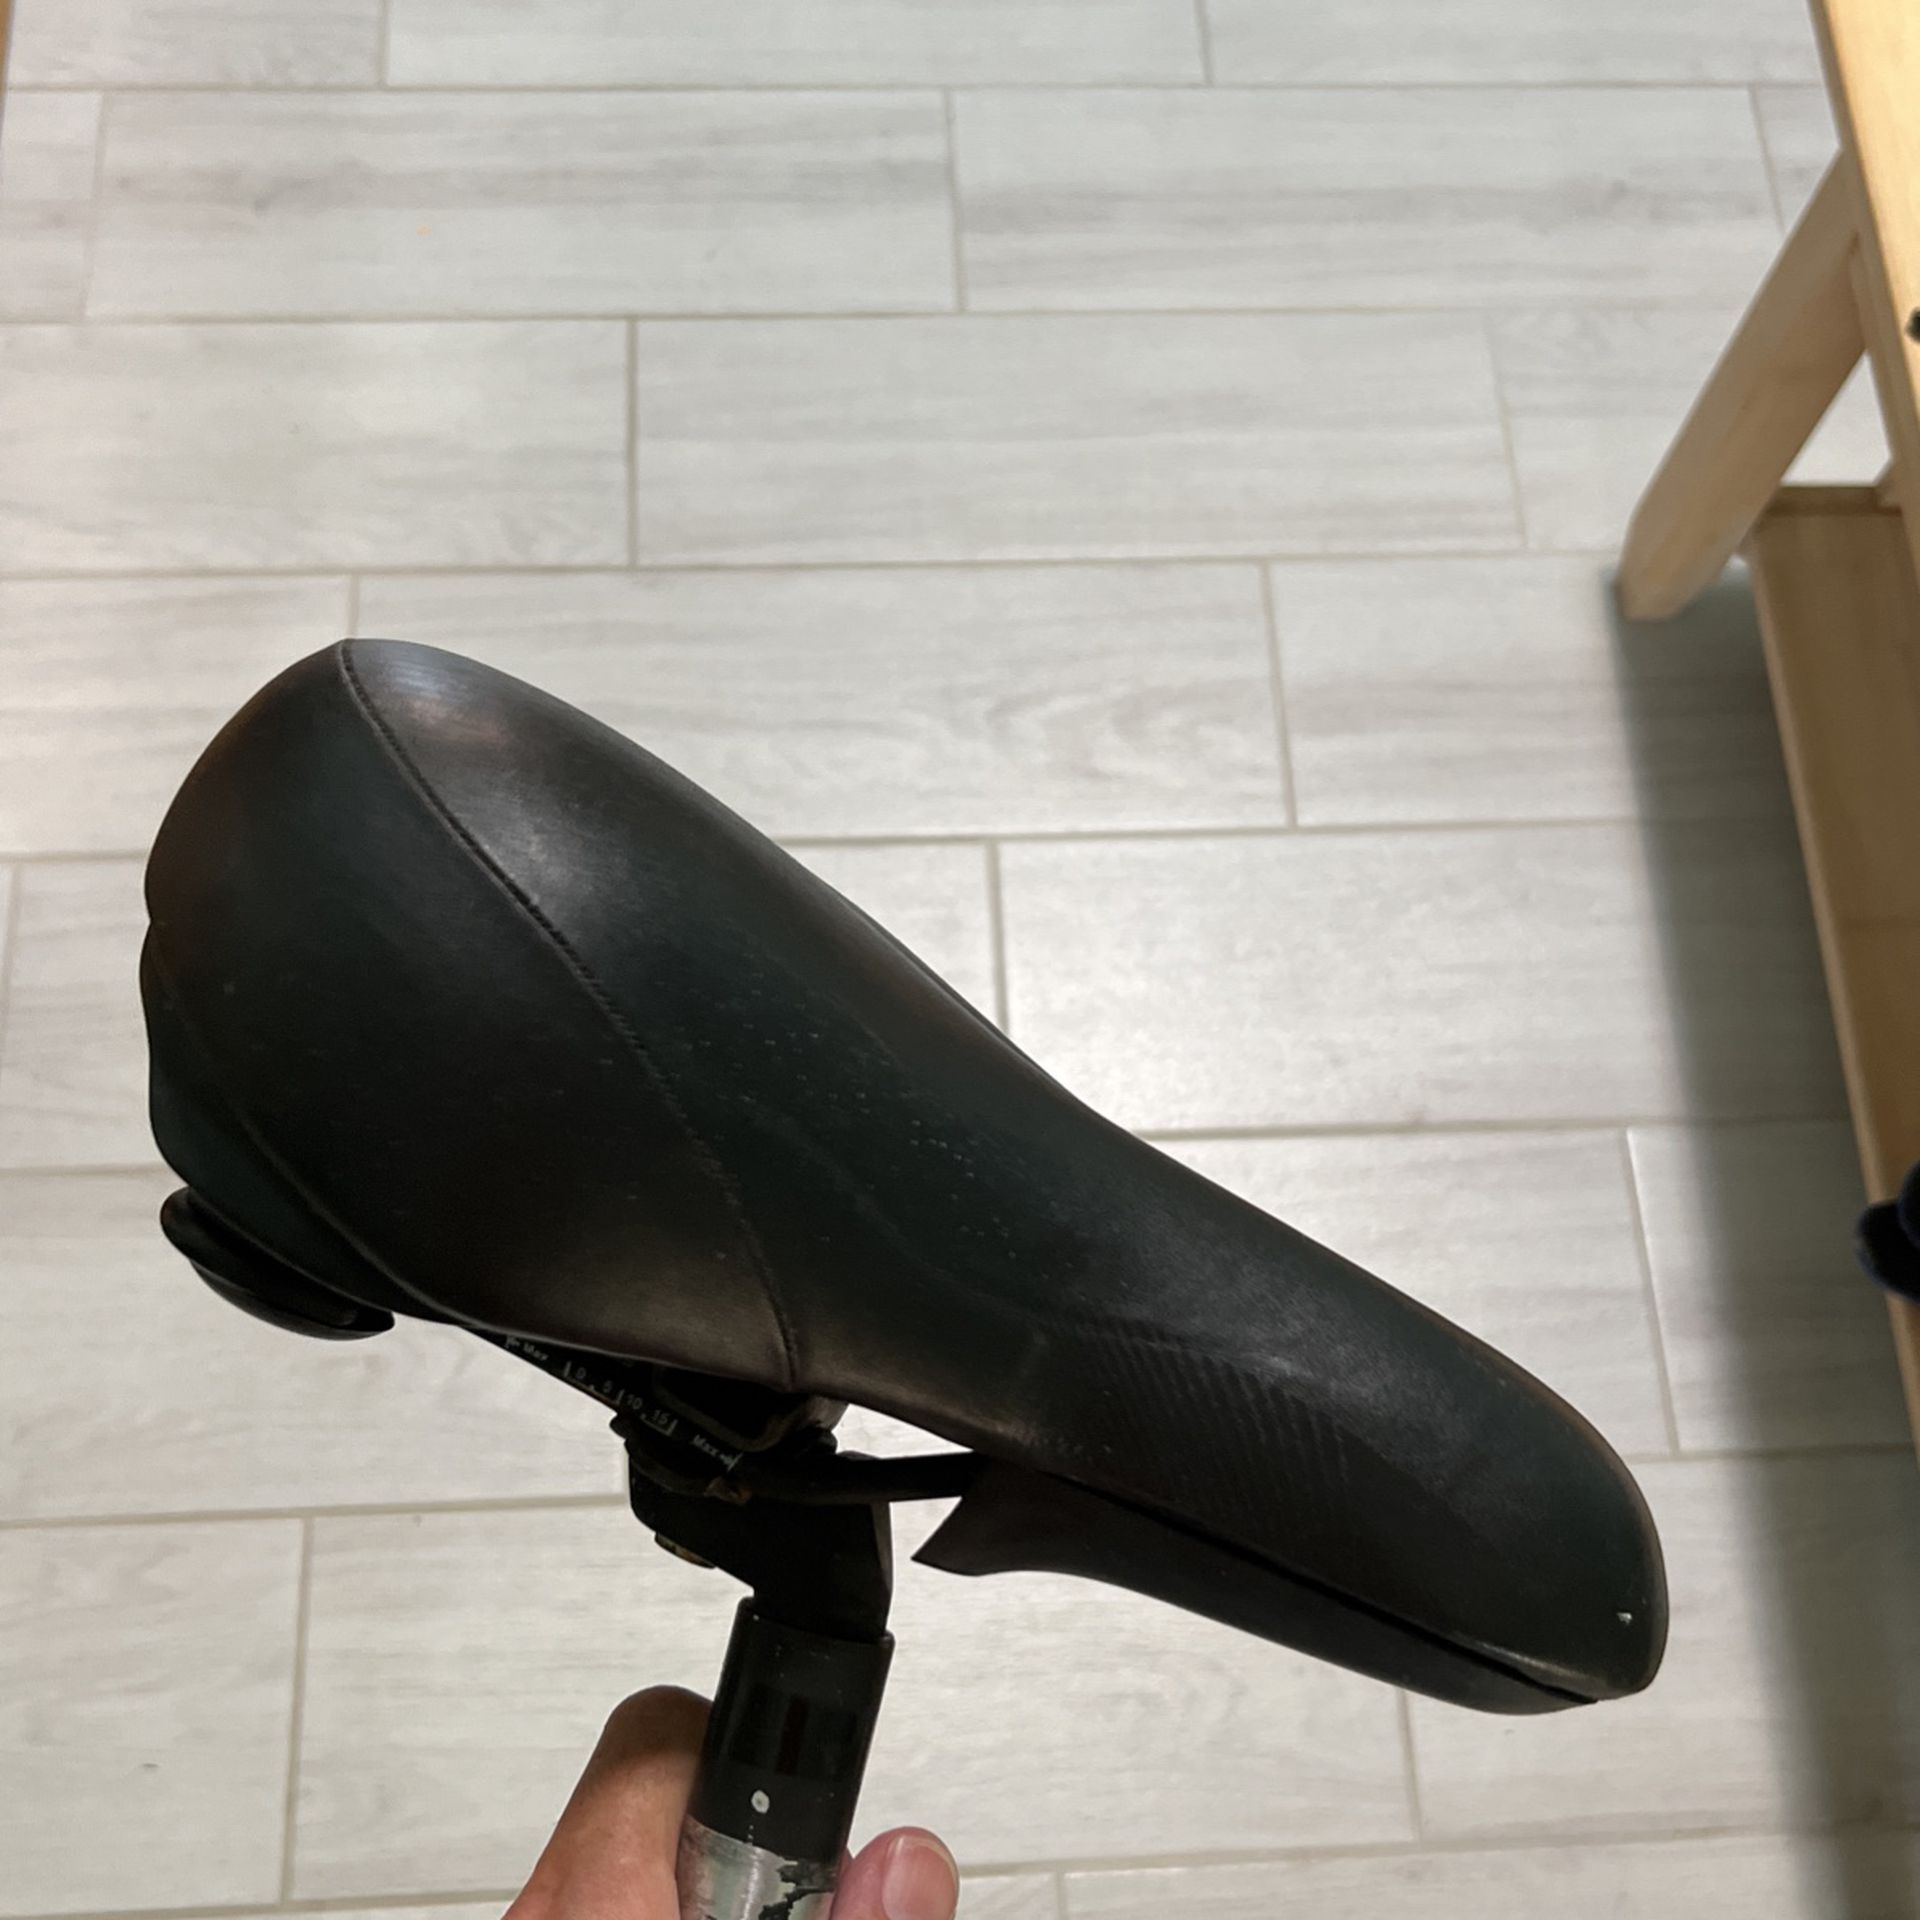 Bicycle seat for sale 12.00 Good Condition 